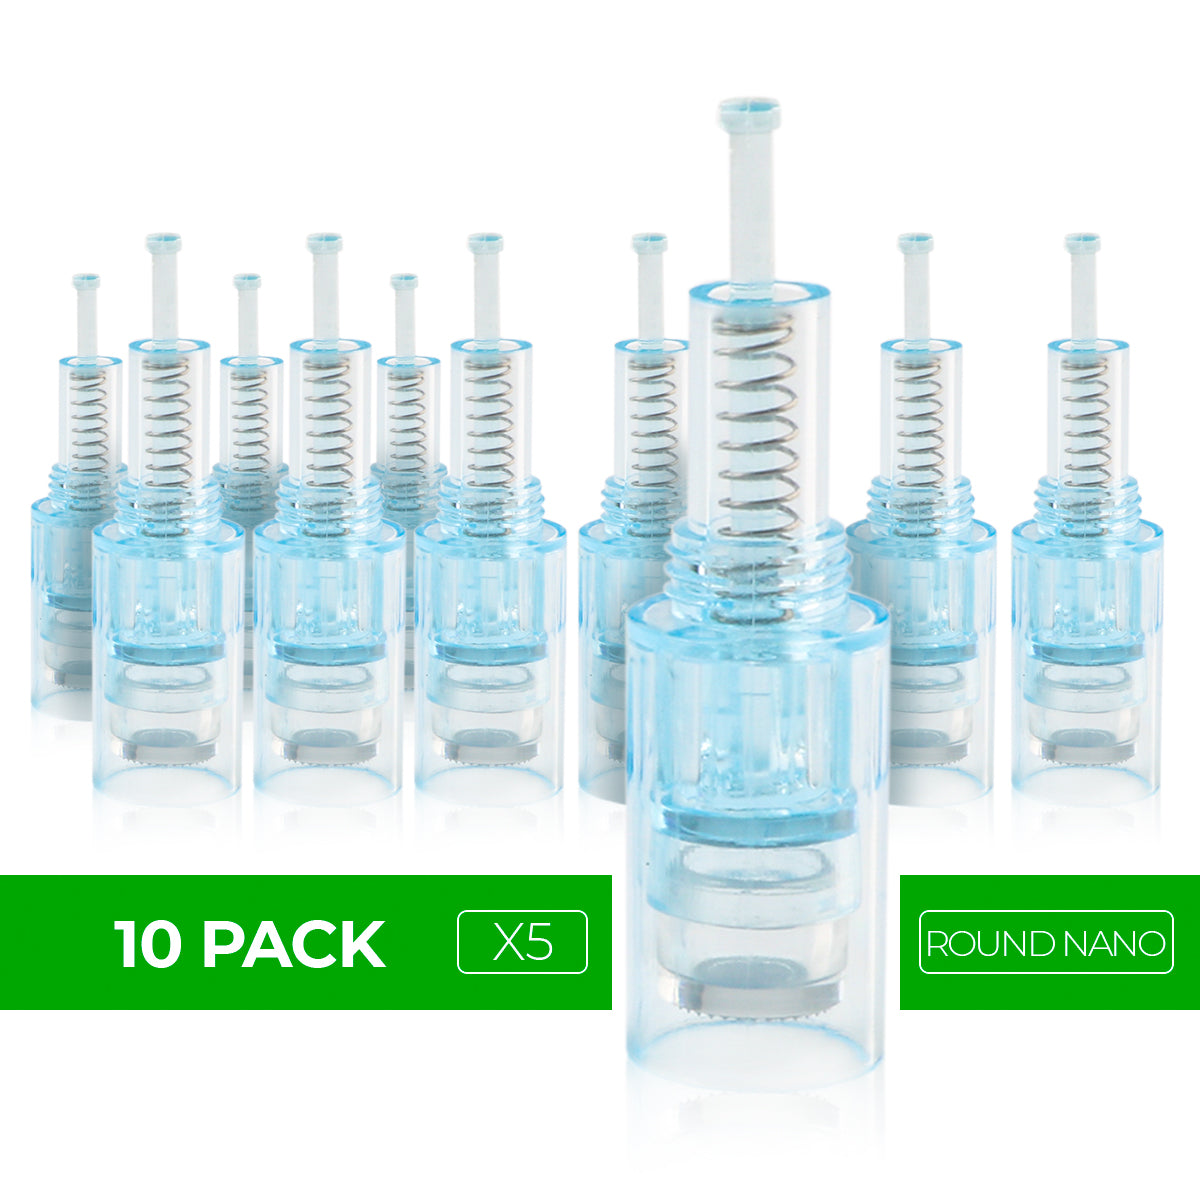 Dr. Pen Ultima X5 Replacement Cartridges - (10 PACK) - Round Nano Bayonet Slot - Disposable Replacement Parts